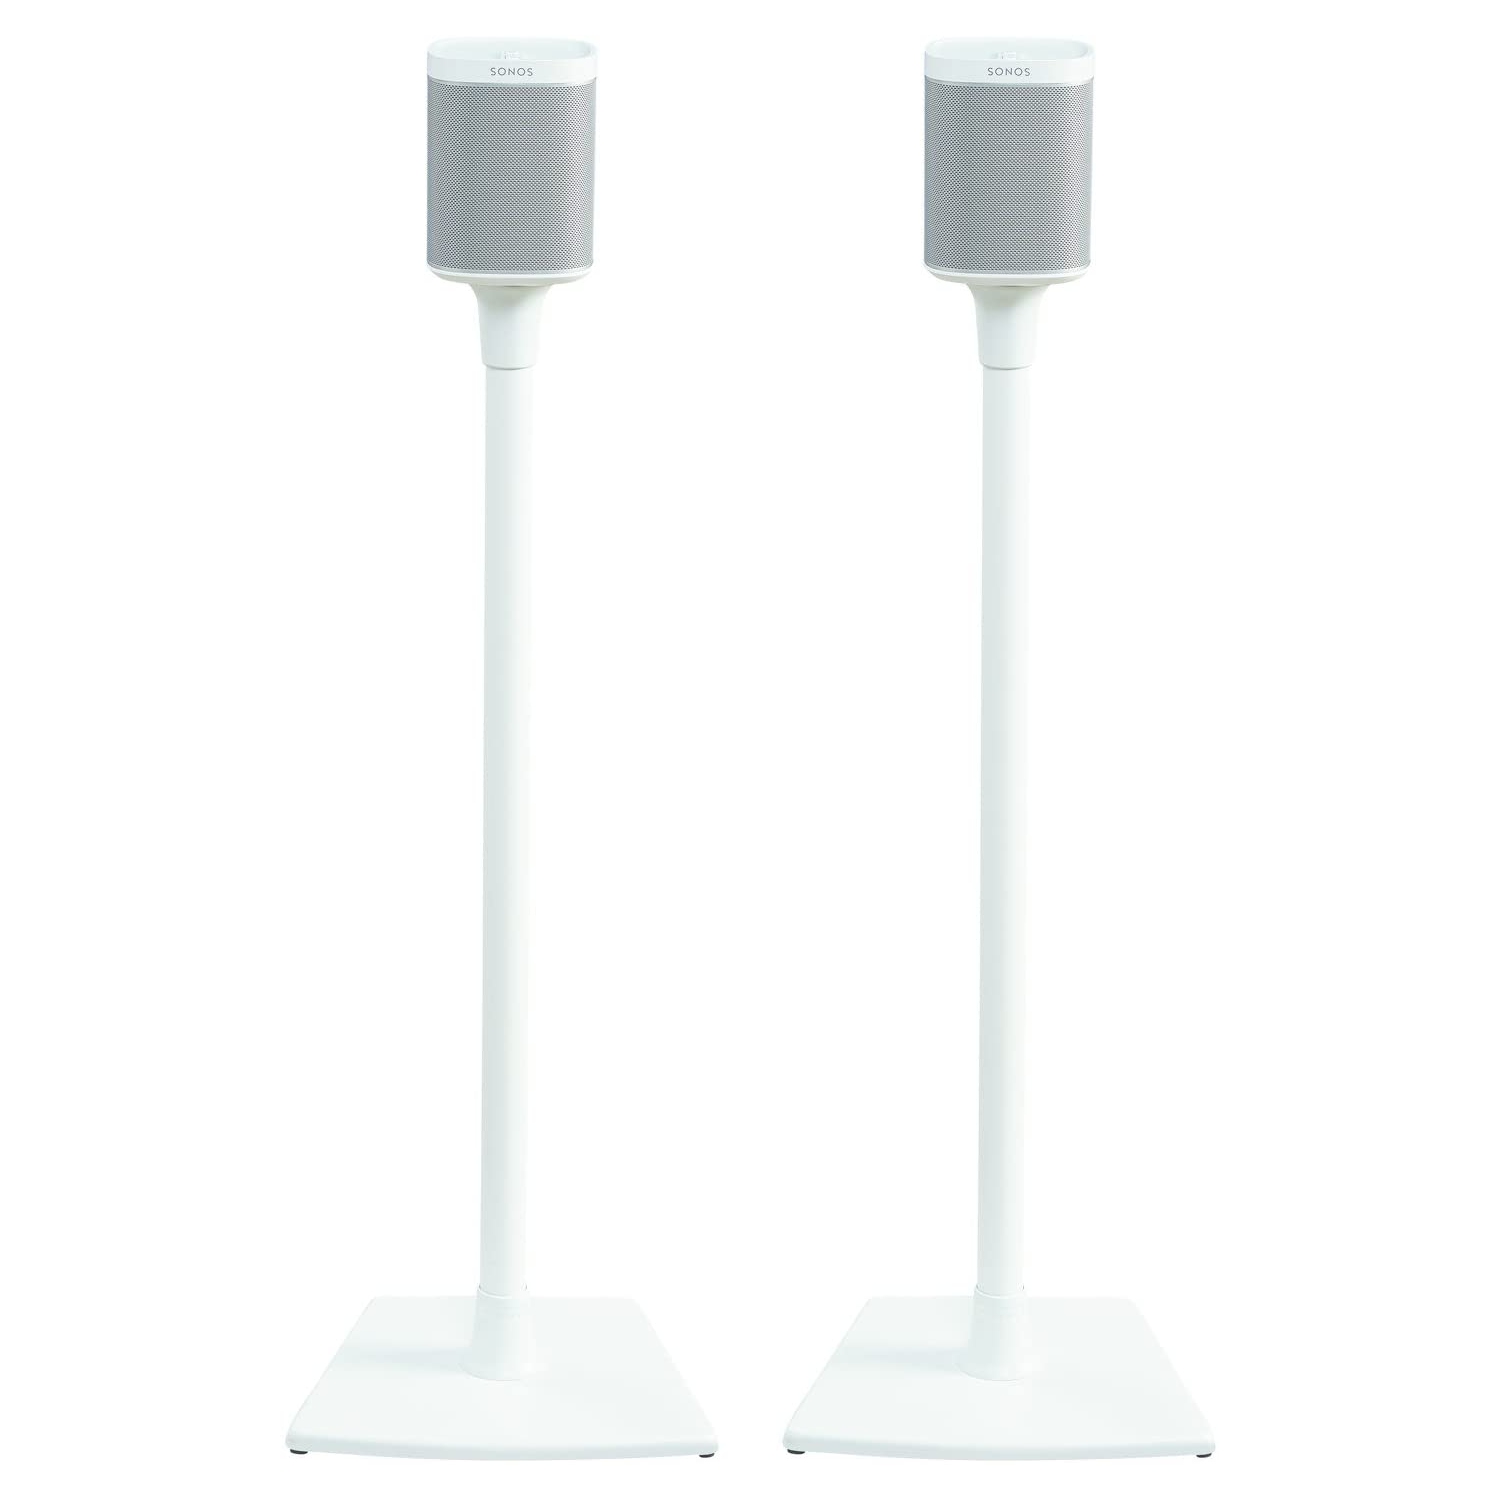 Sanus WSS2 Speaker Stands for SONOS PLAY 1 and PLAY 3 Speakers (Black Pair)